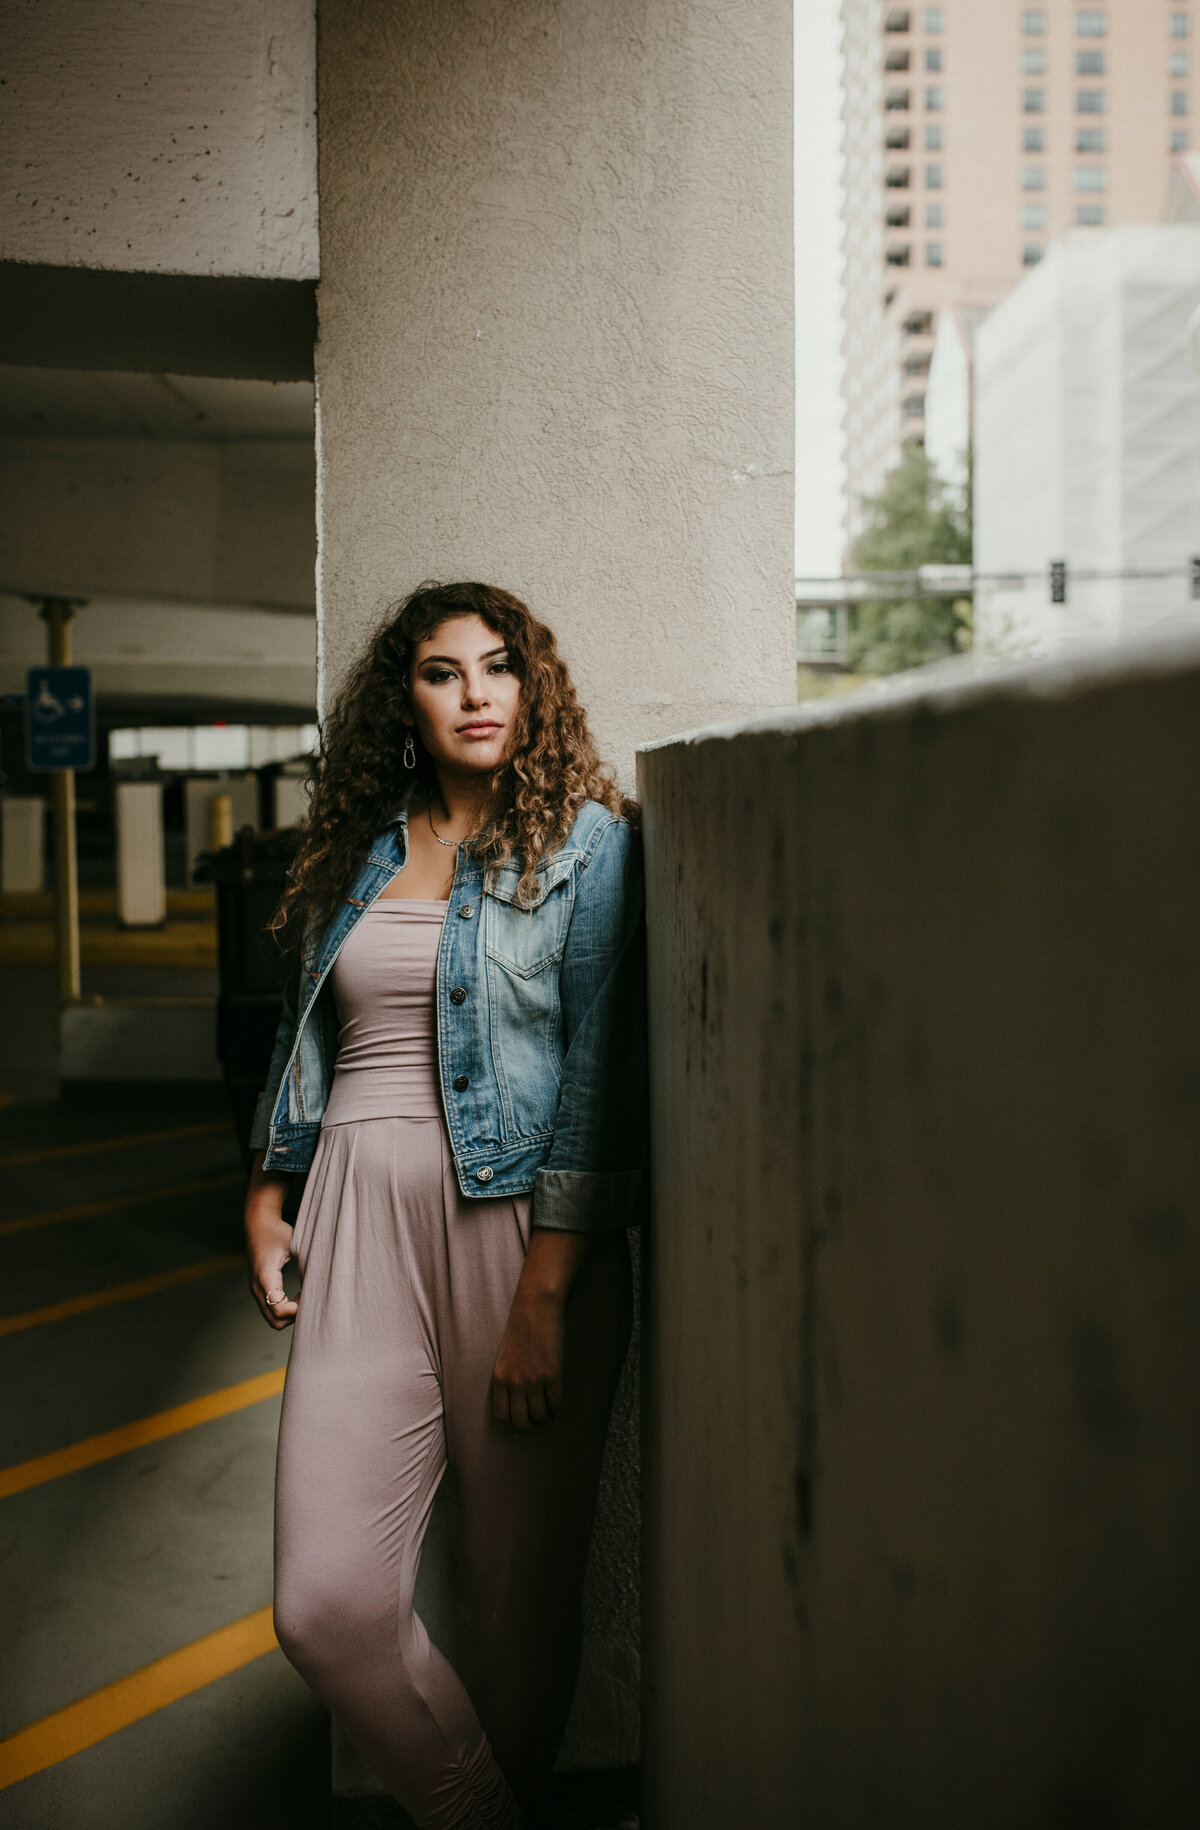 Tell your story in street style with senior portraits embracing the essence of urban chic. Shannon Kathleen Photography captures the energy of your senior spirit. Schedule your city session